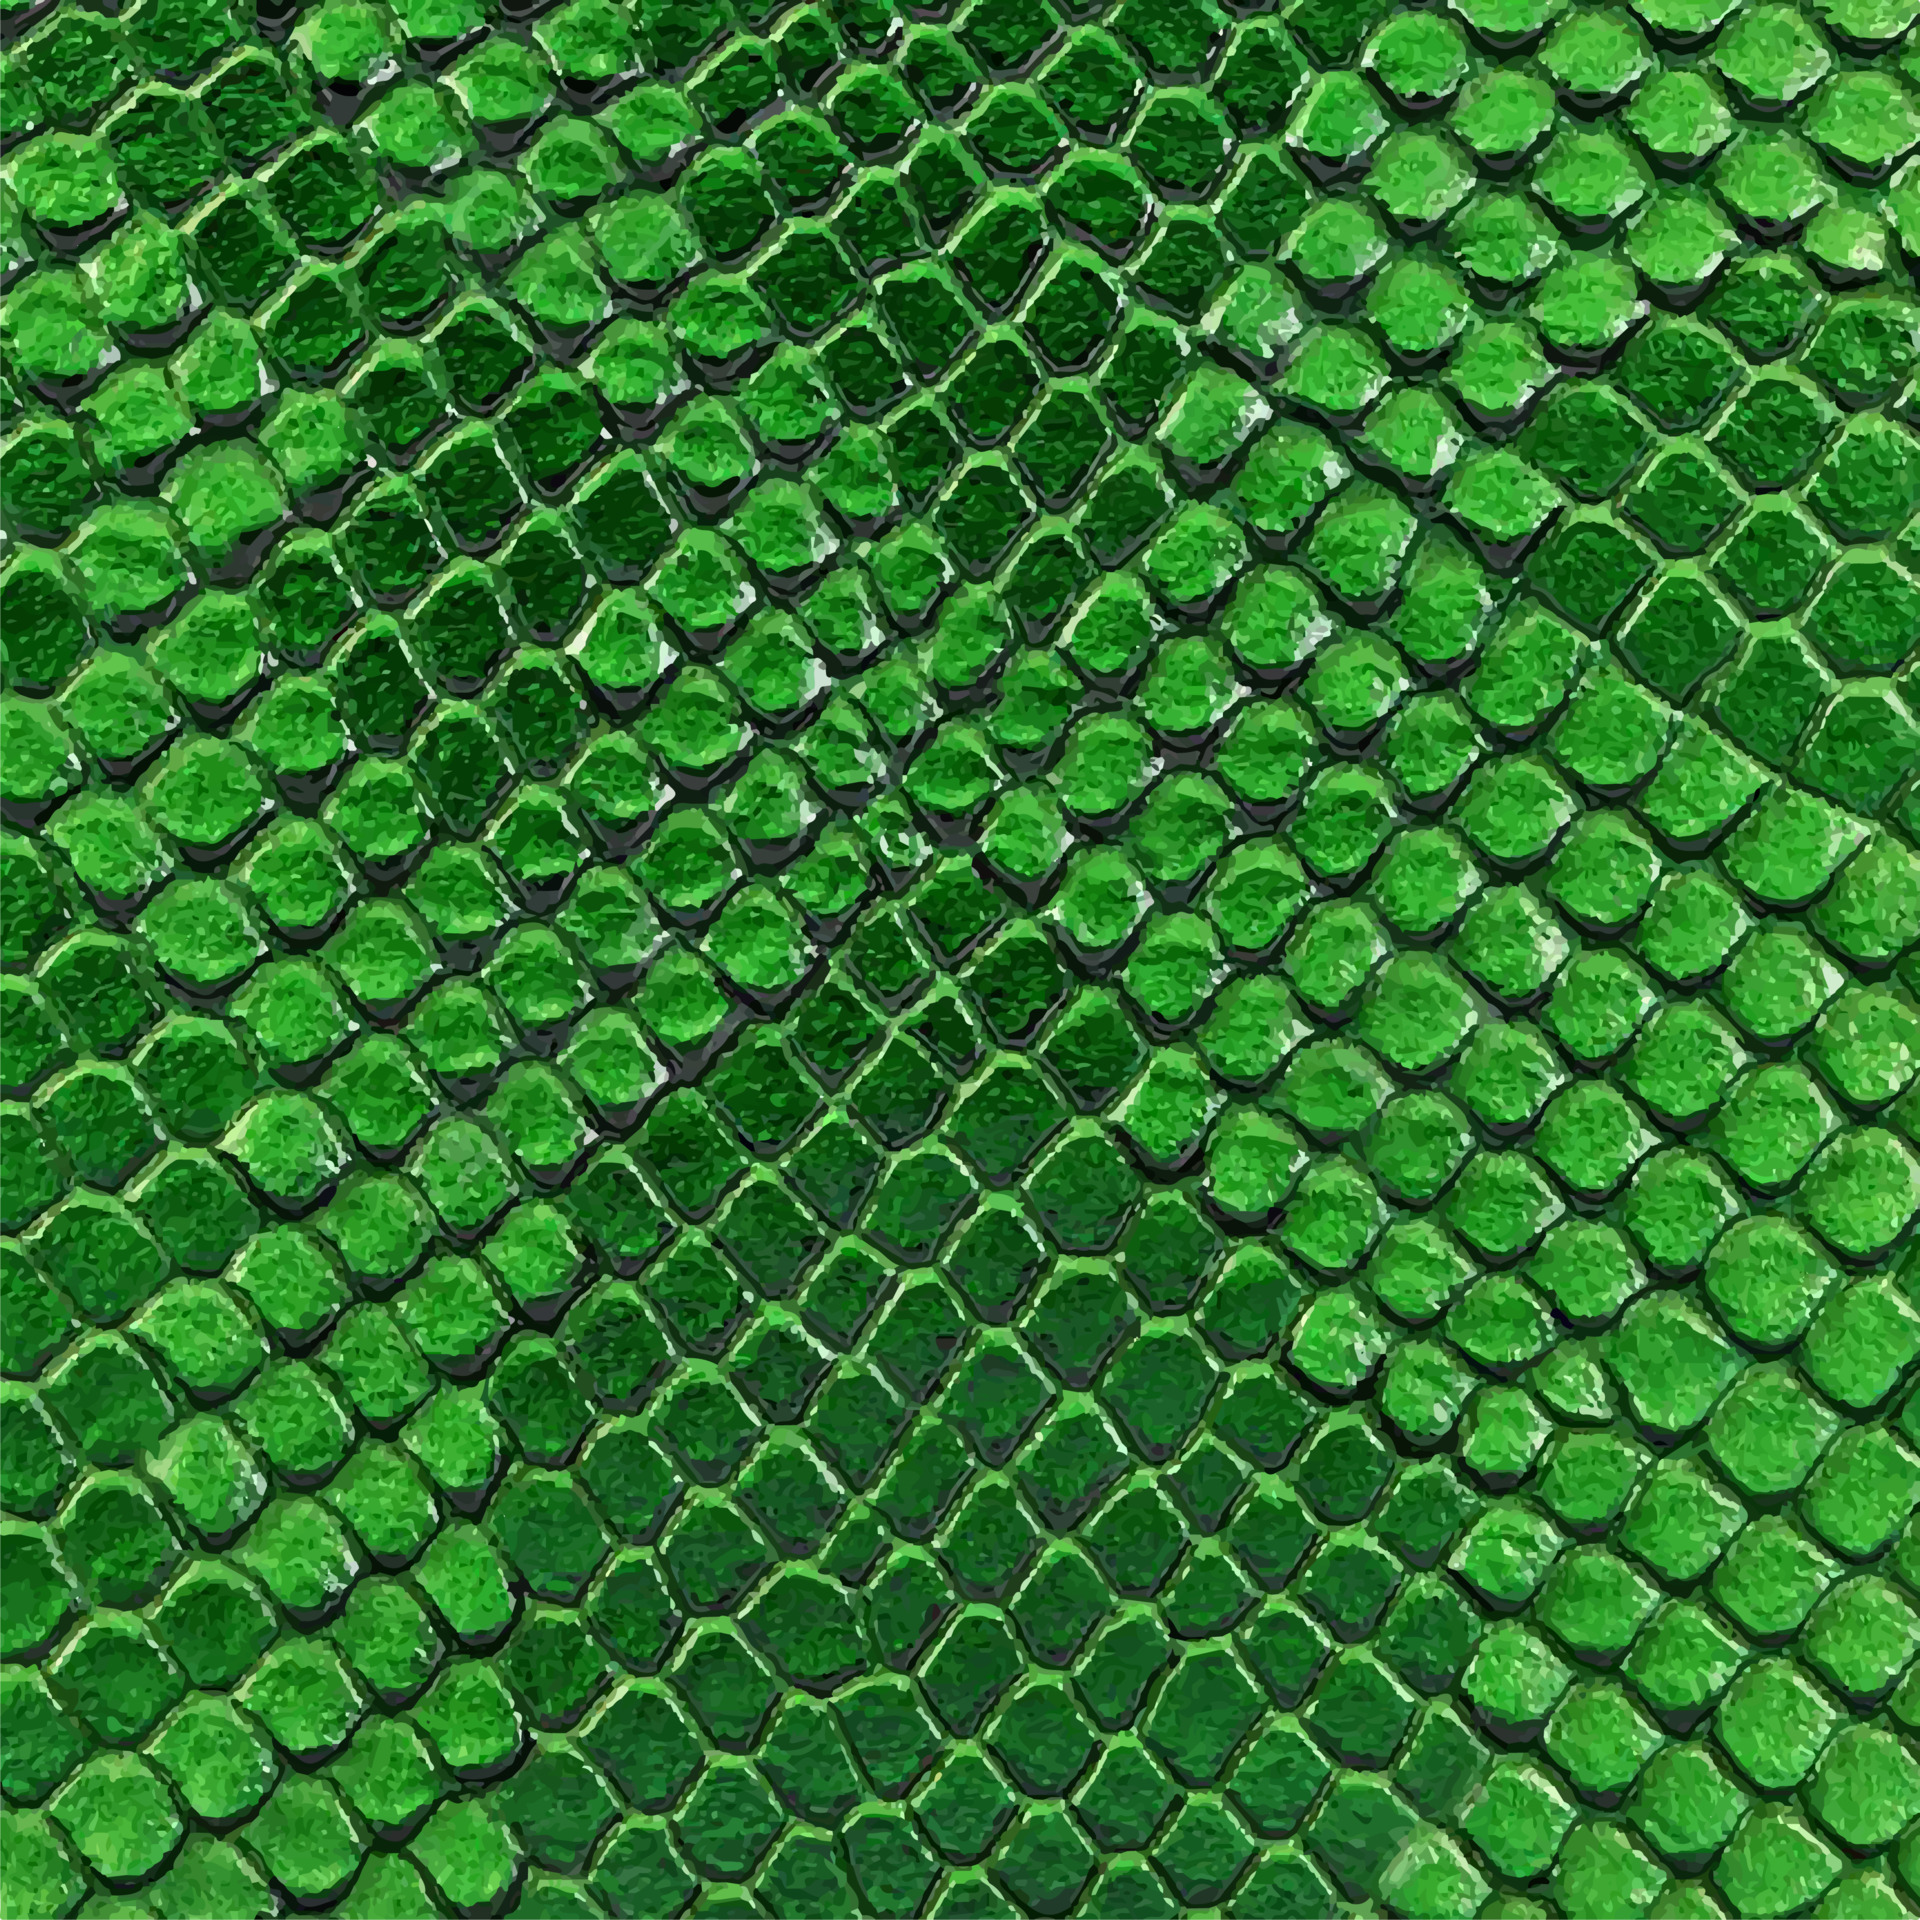 Green snake skin texture. Reptile and serpent scales surface